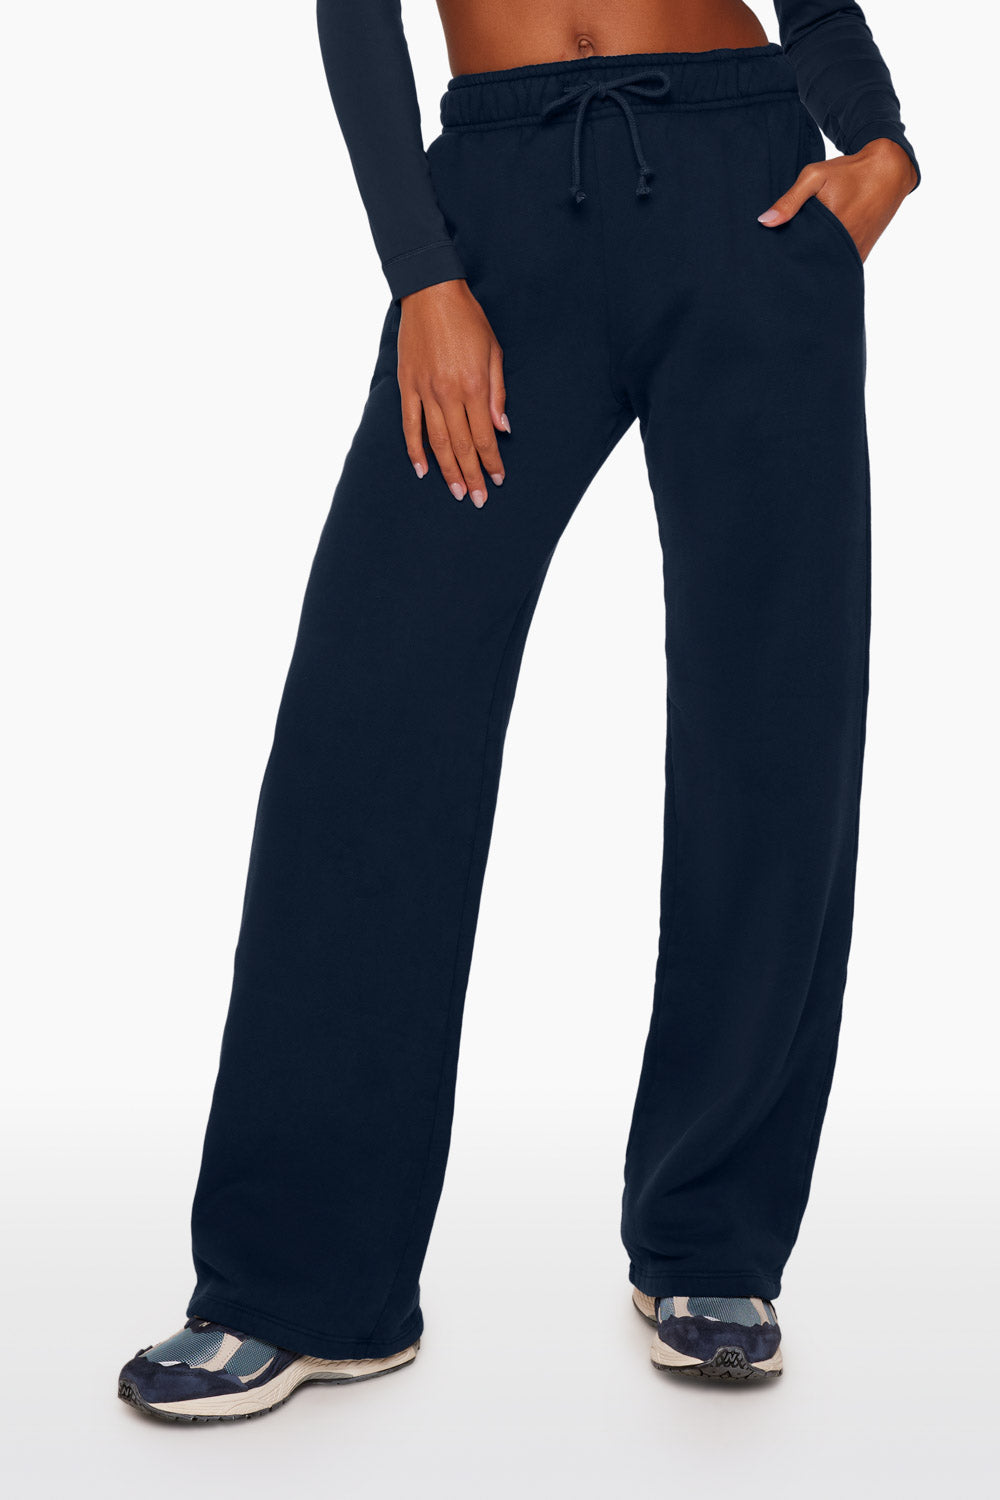 OPENED THIGH JOGGER PANTS